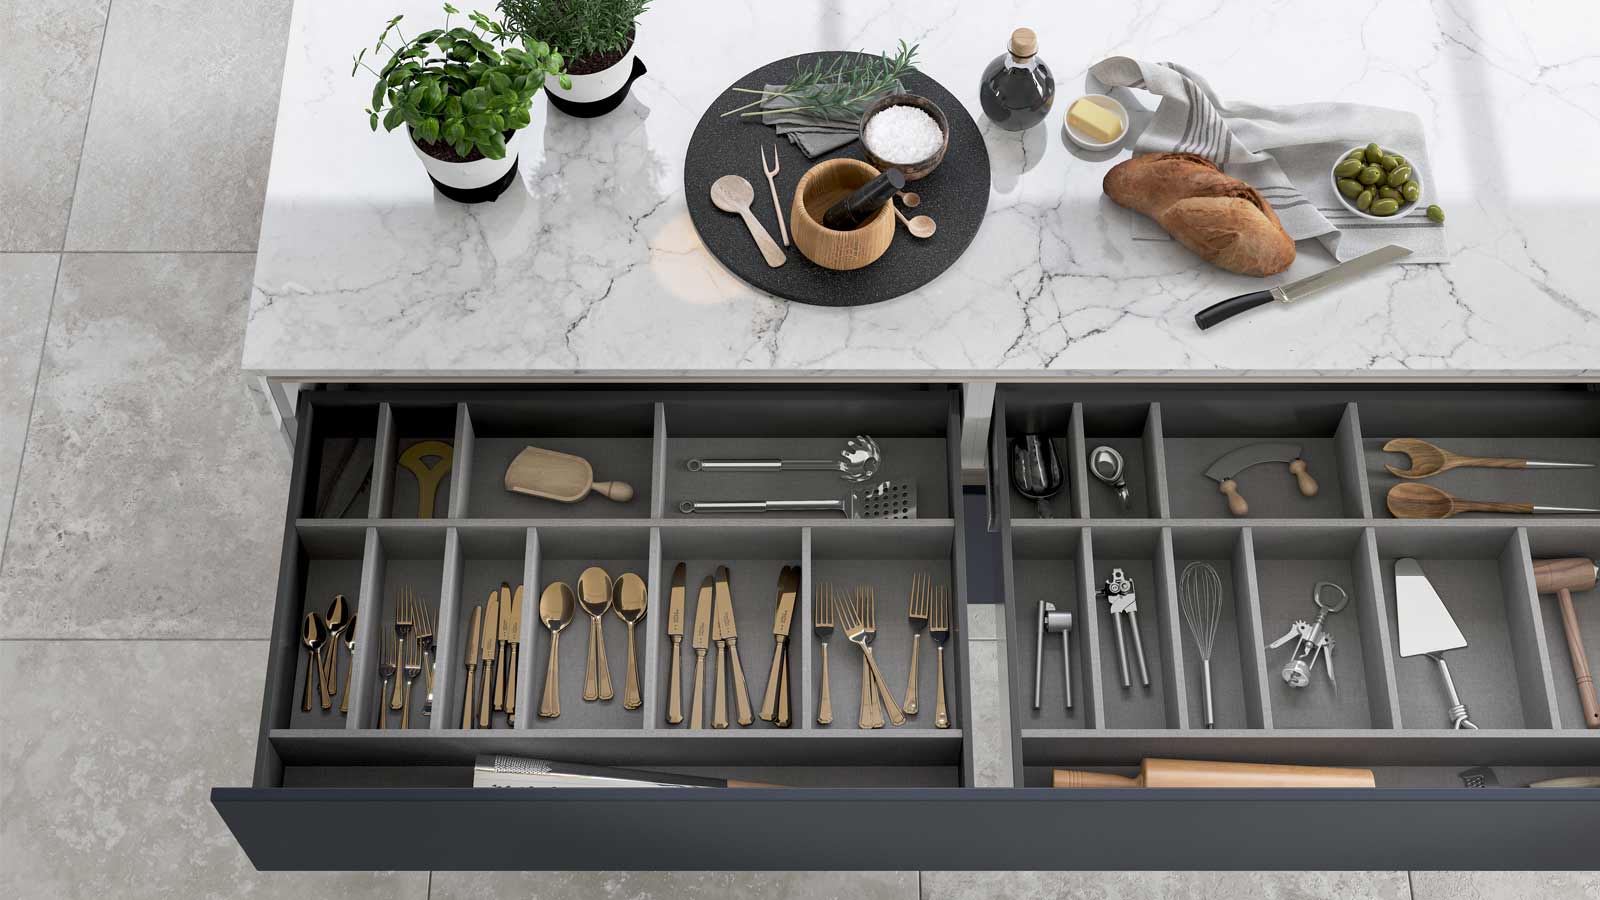 Kitchen drawers with extra wide and deep capacity in a modern kitchen